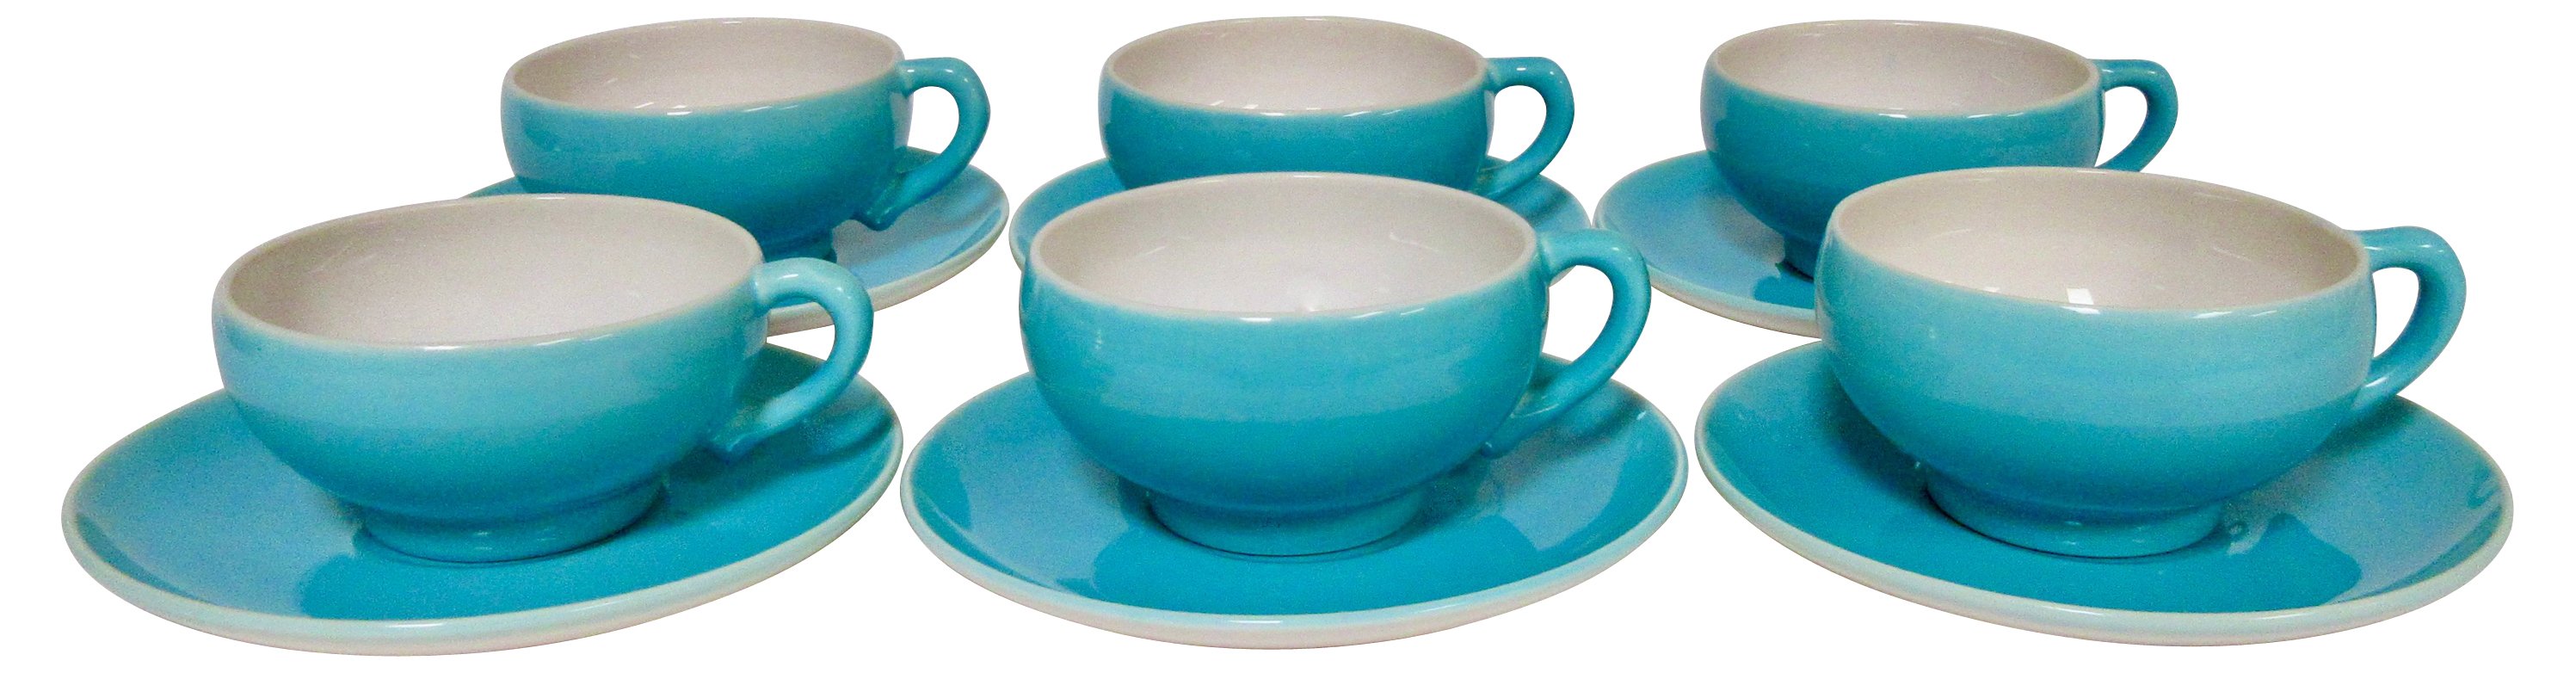 1930s California Pottery Cups & Saucers~P77624834